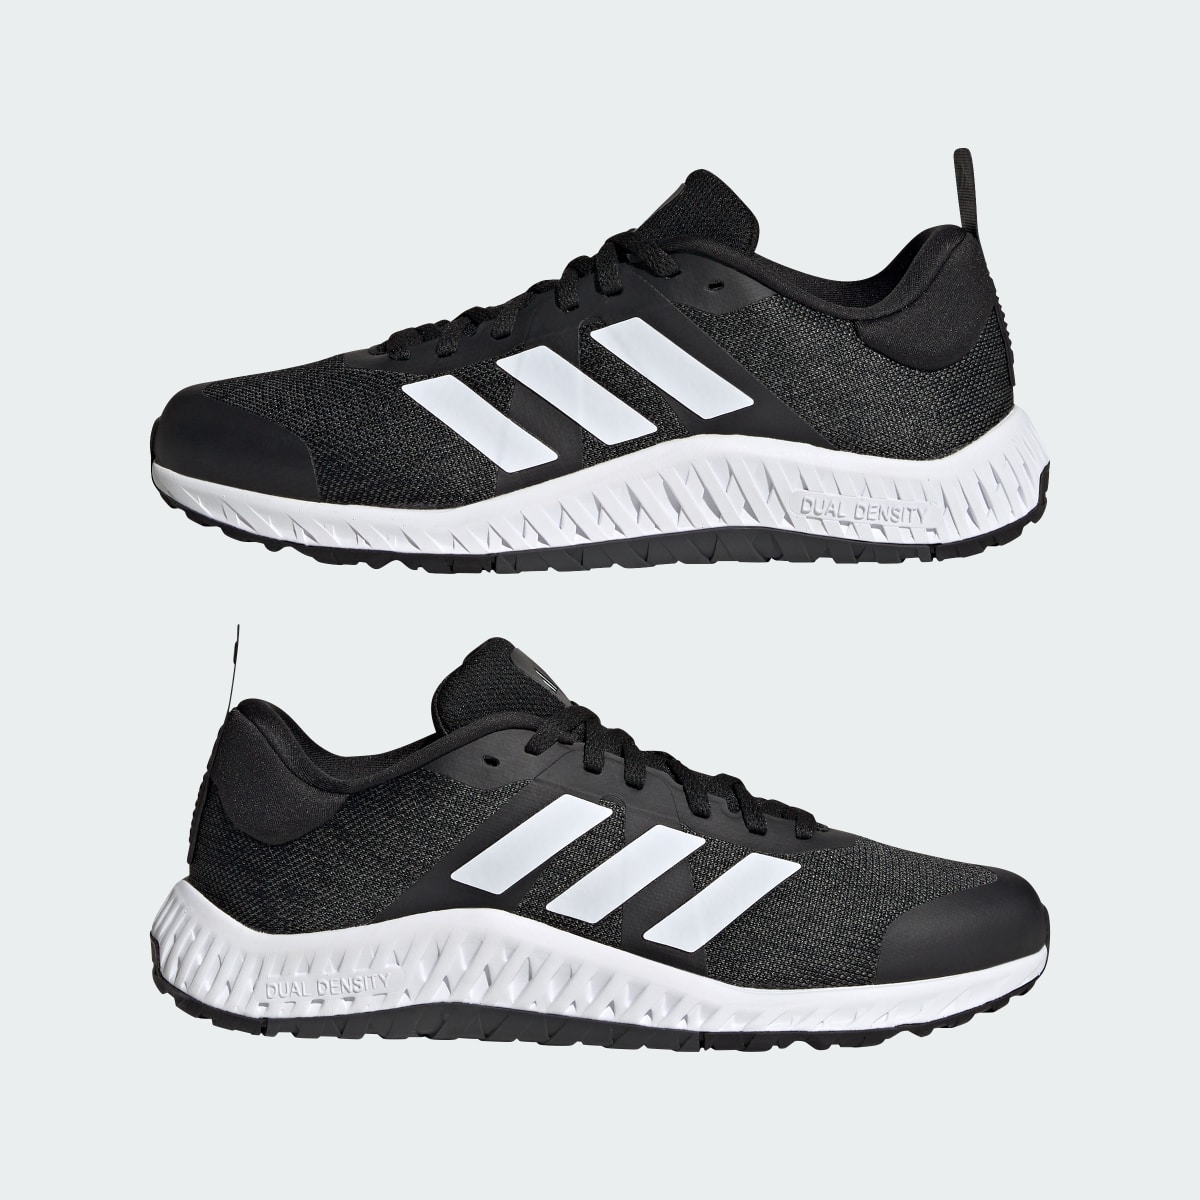 Adidas Everyset Trainer Shoes. 8